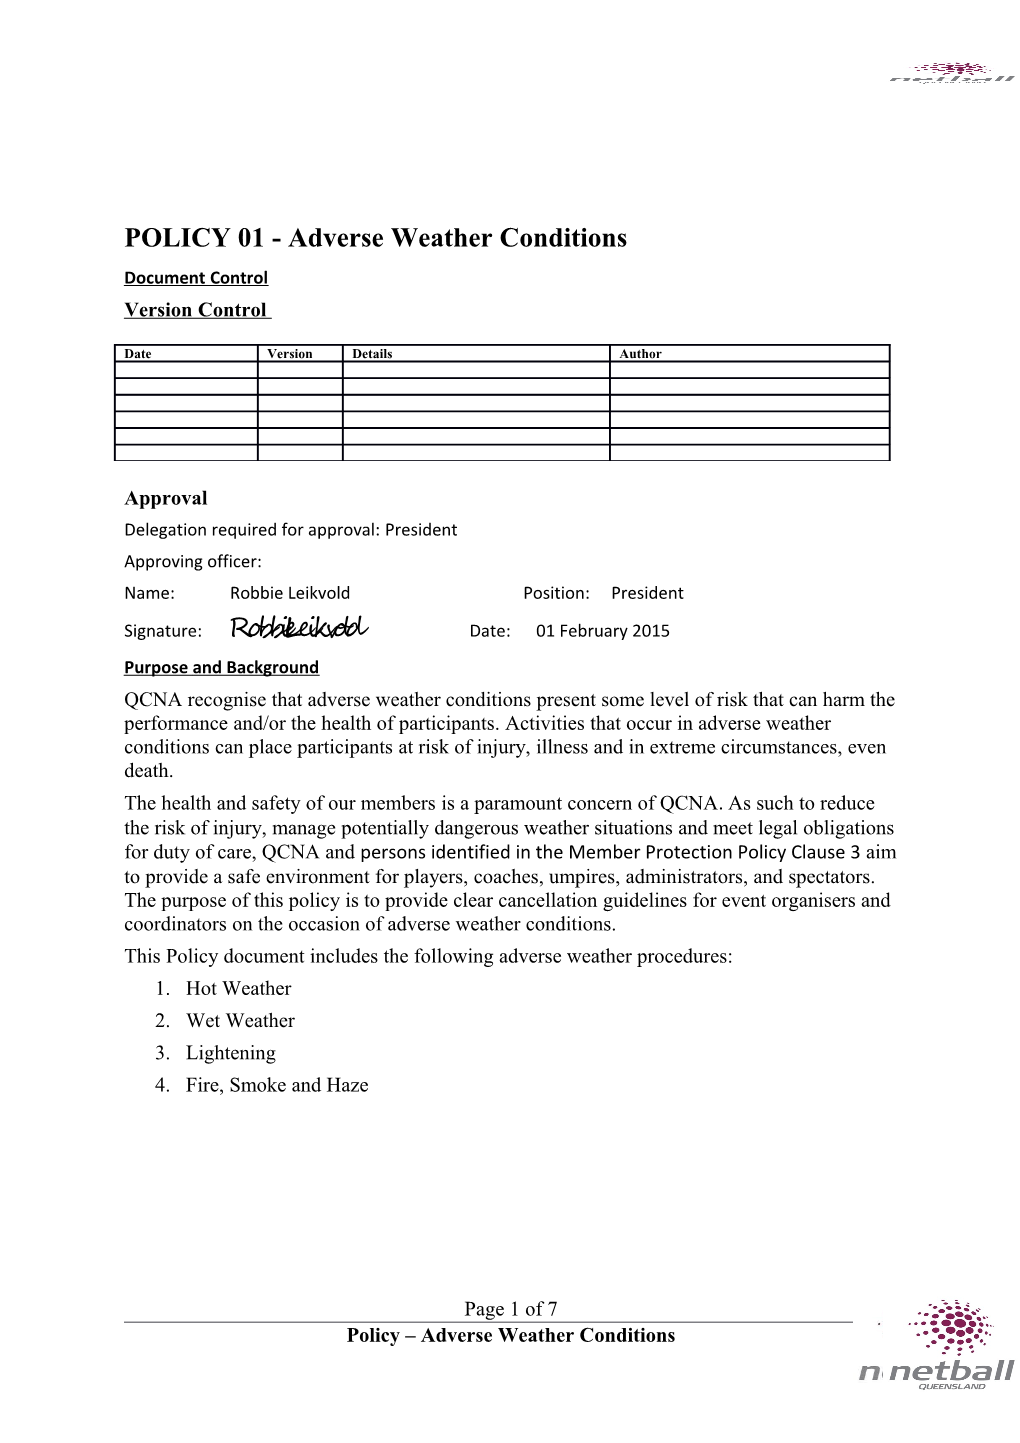 POLICY 01 - Adverse Weather Conditions